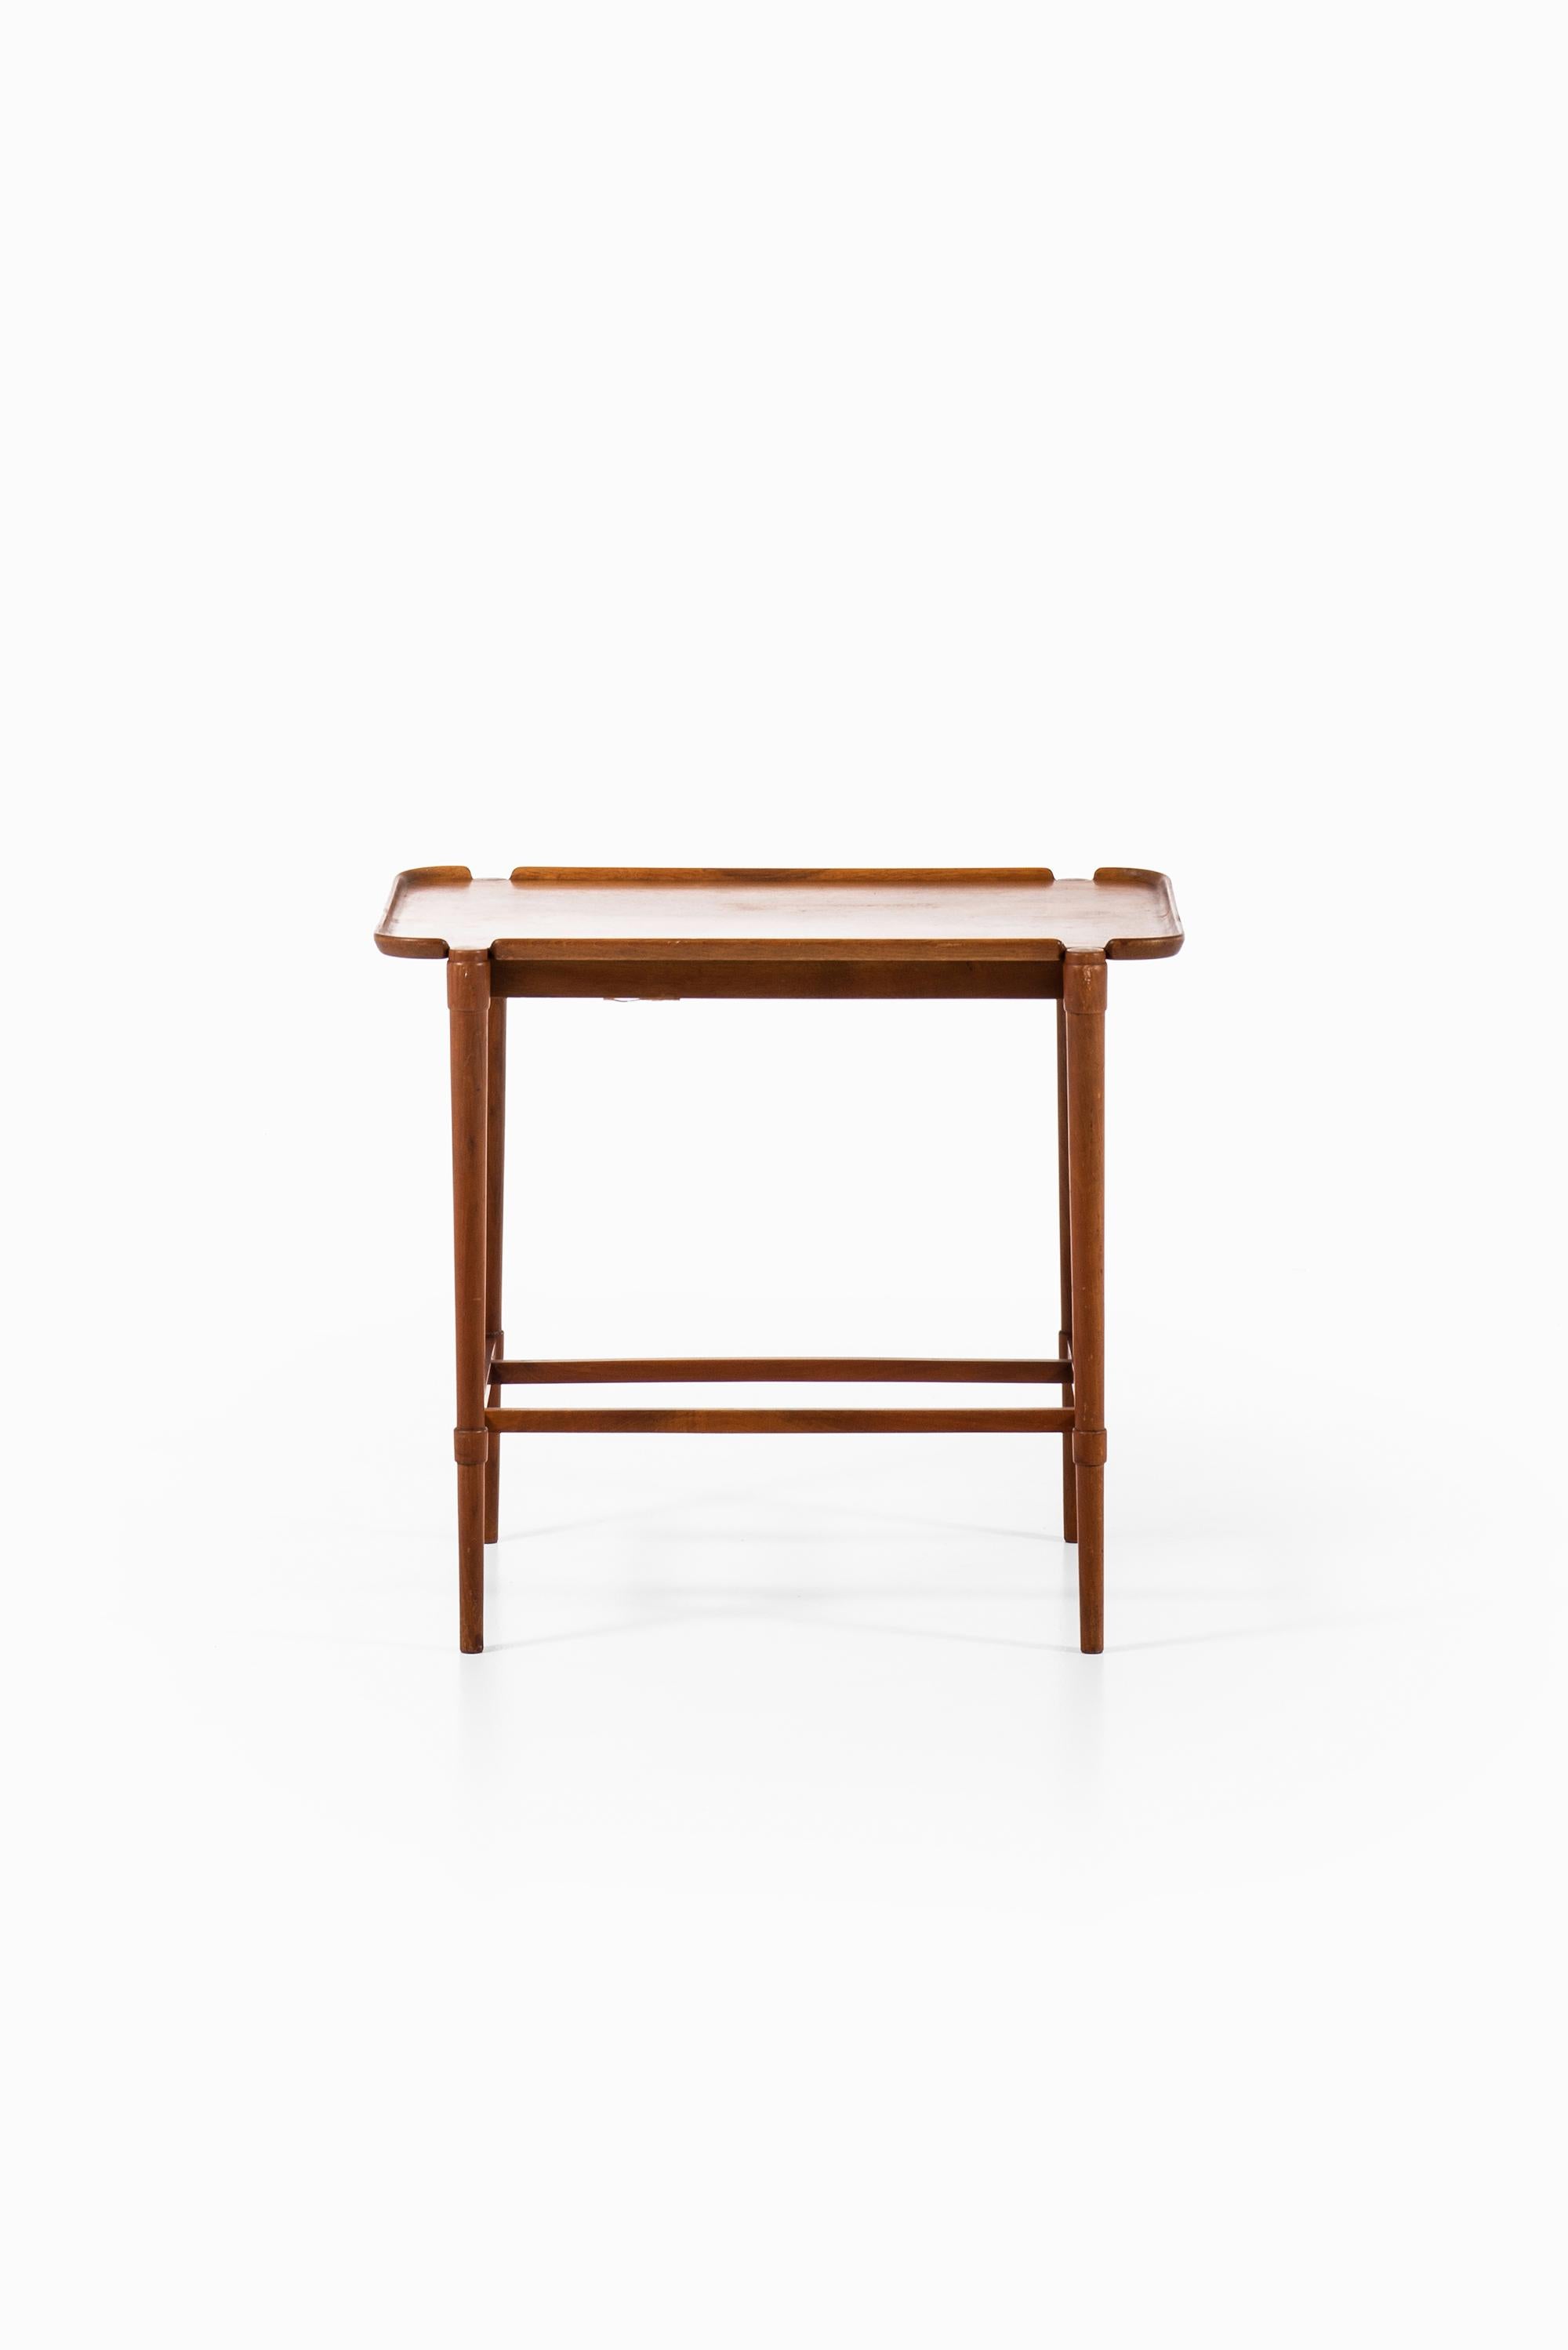 Rare side / tray table model no 1775 designed by Peter Hvidt. Produced by Fritz Hansen in Denmark.